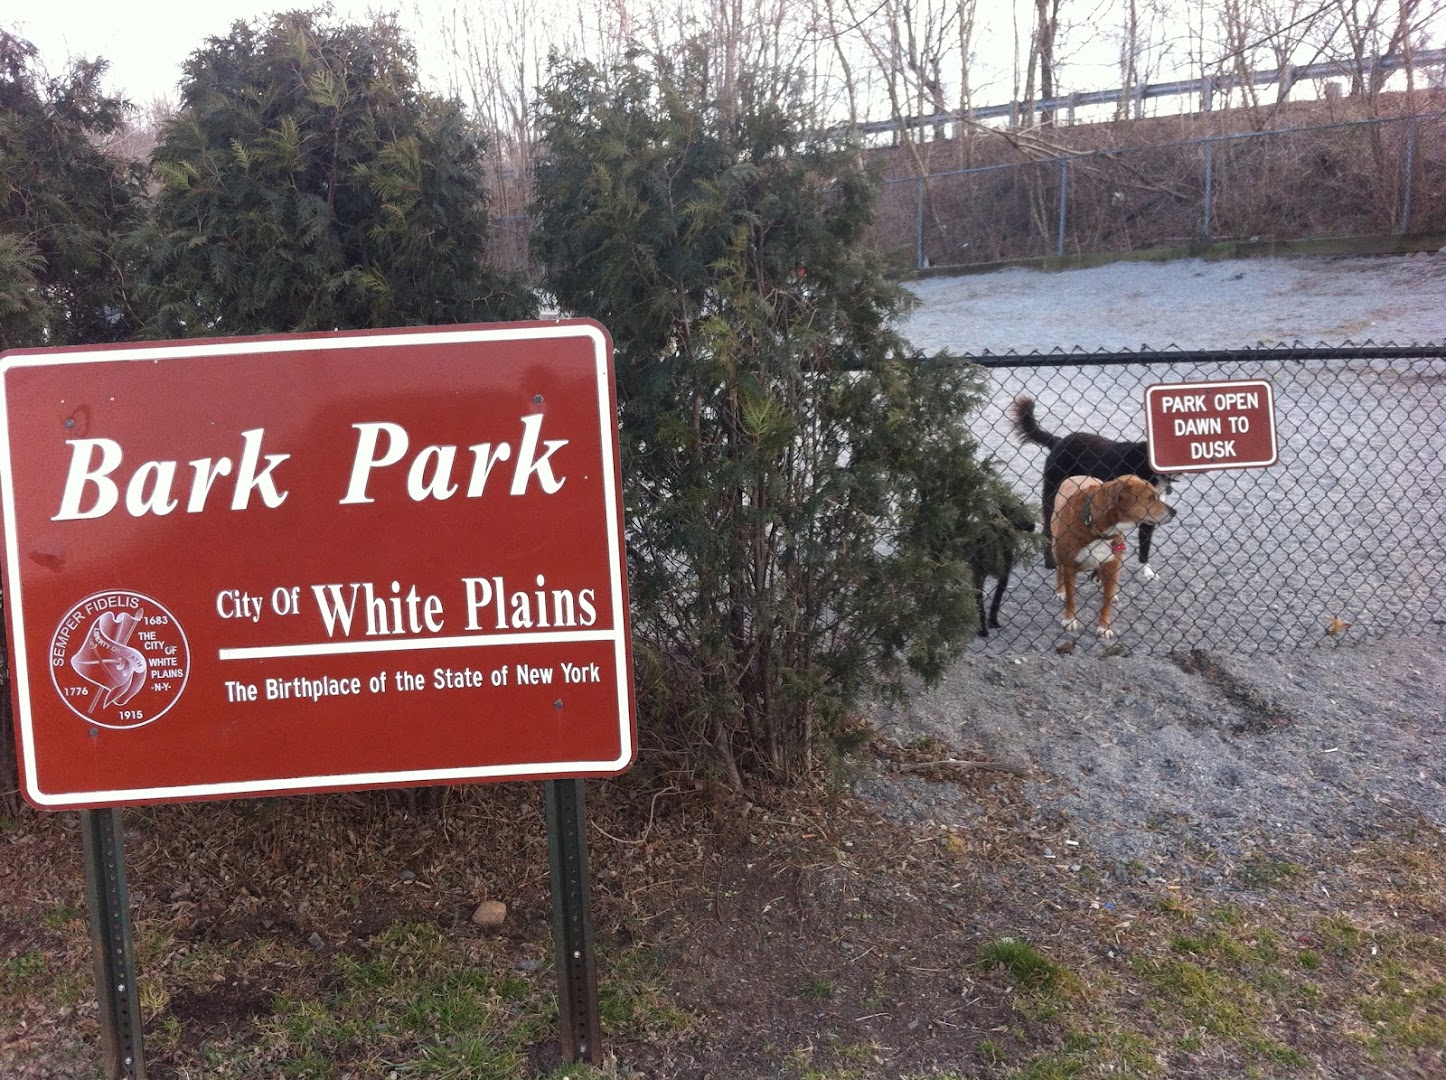 Bark Park - Off-Leash Dog Run for Members Only